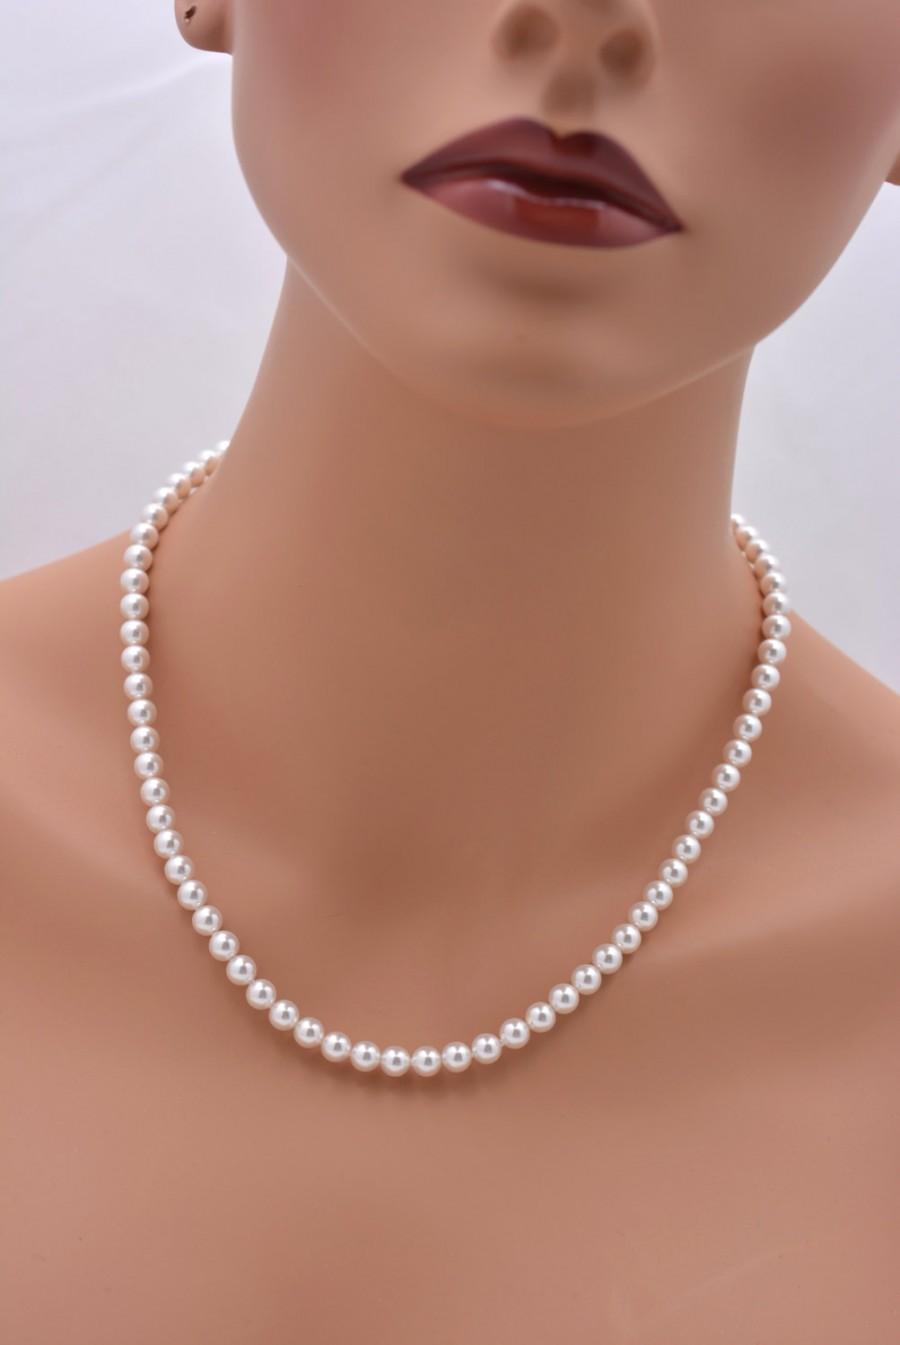 Свадьба - Pearl Necklace, Pearl Bridesmaid Necklace, Classic Pearl Necklace, Pearl Strand Necklace, White or Ivory Pearl Necklace, 6mm Pearl 0259